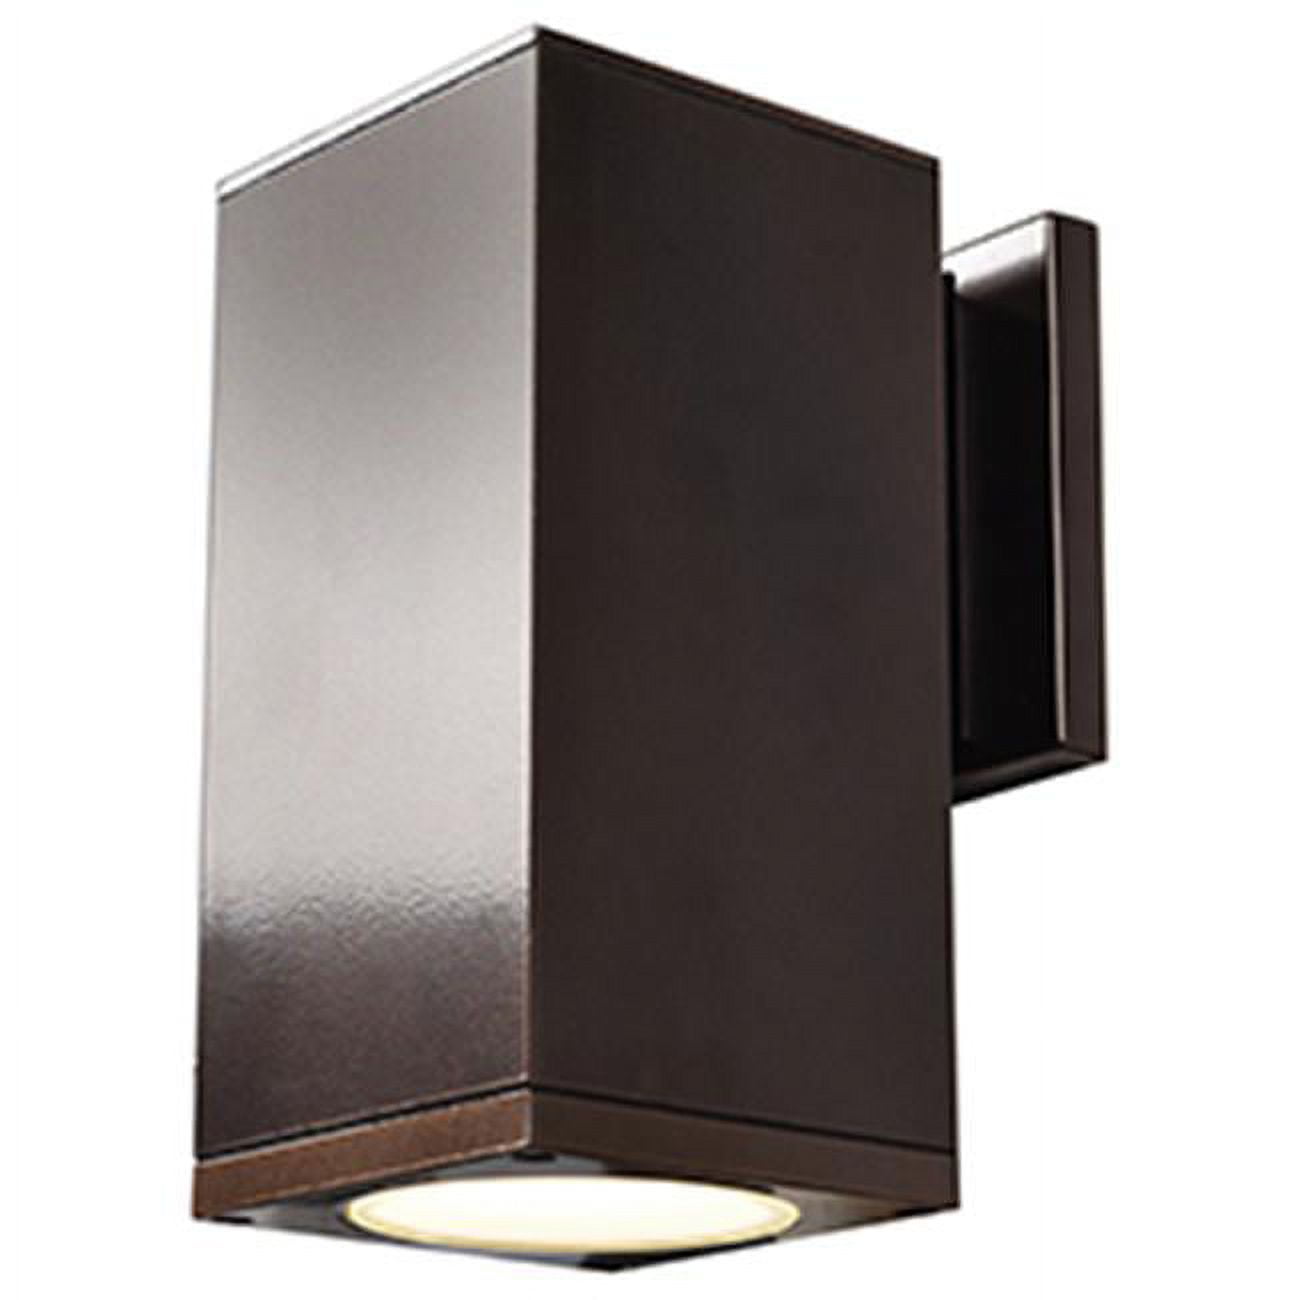 20033ledmg-brz-fst 4.5 X 12 X 5.5 In. Bayside Outdoor Square Cylinder Wall Fixture, Bronze